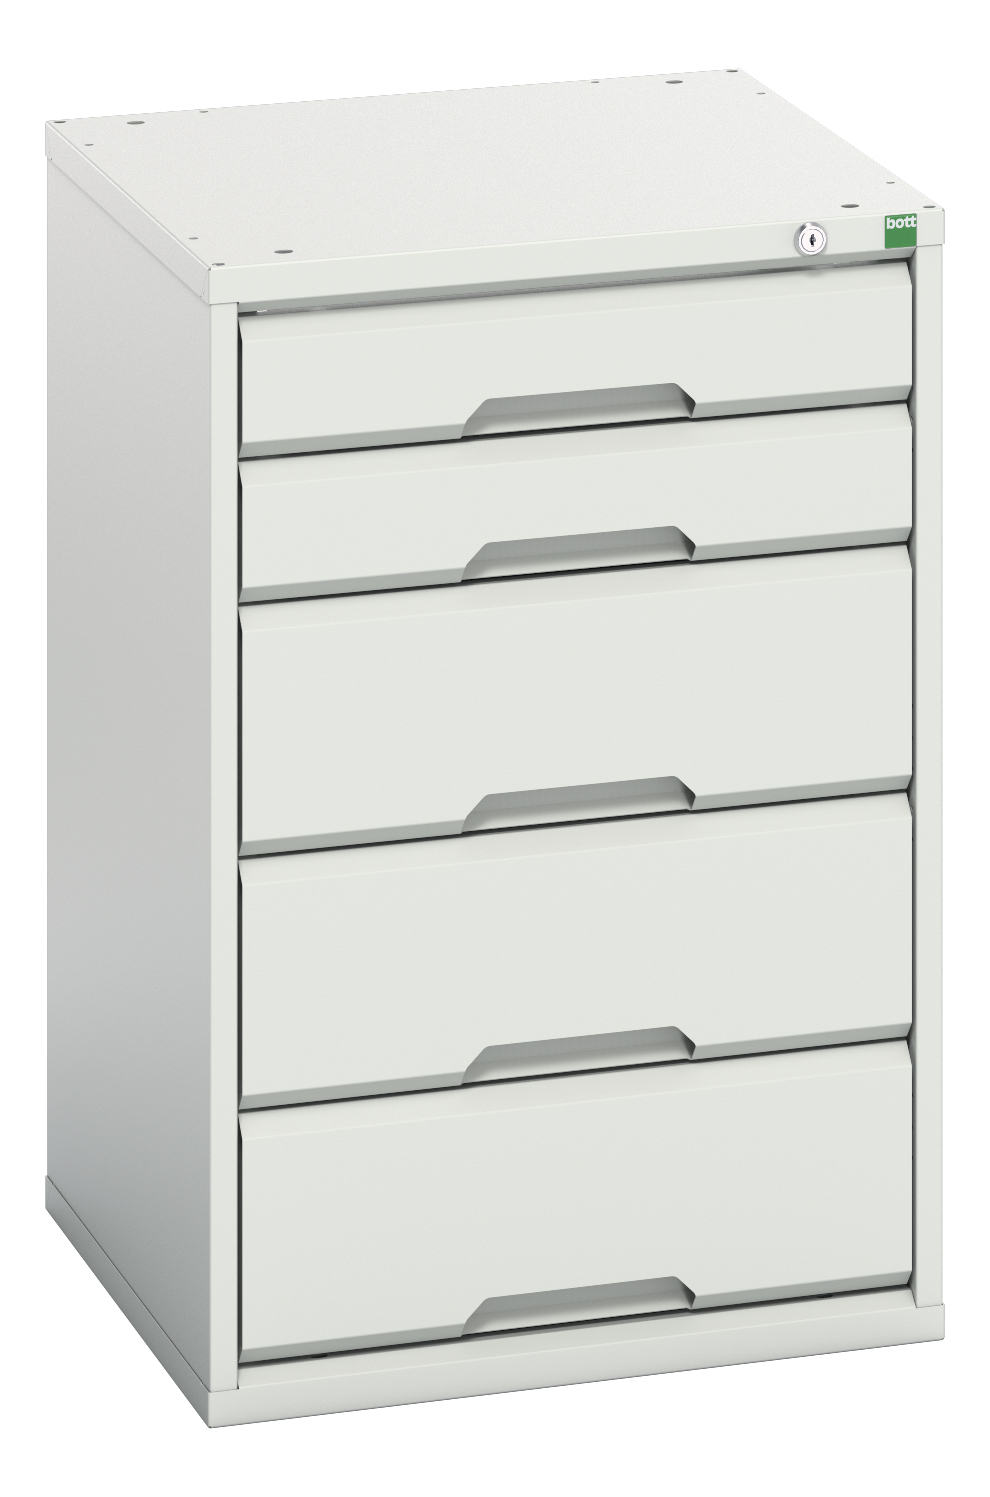 Bott Verso Drawer Cabinet With 5 Drawers - 16925012.16